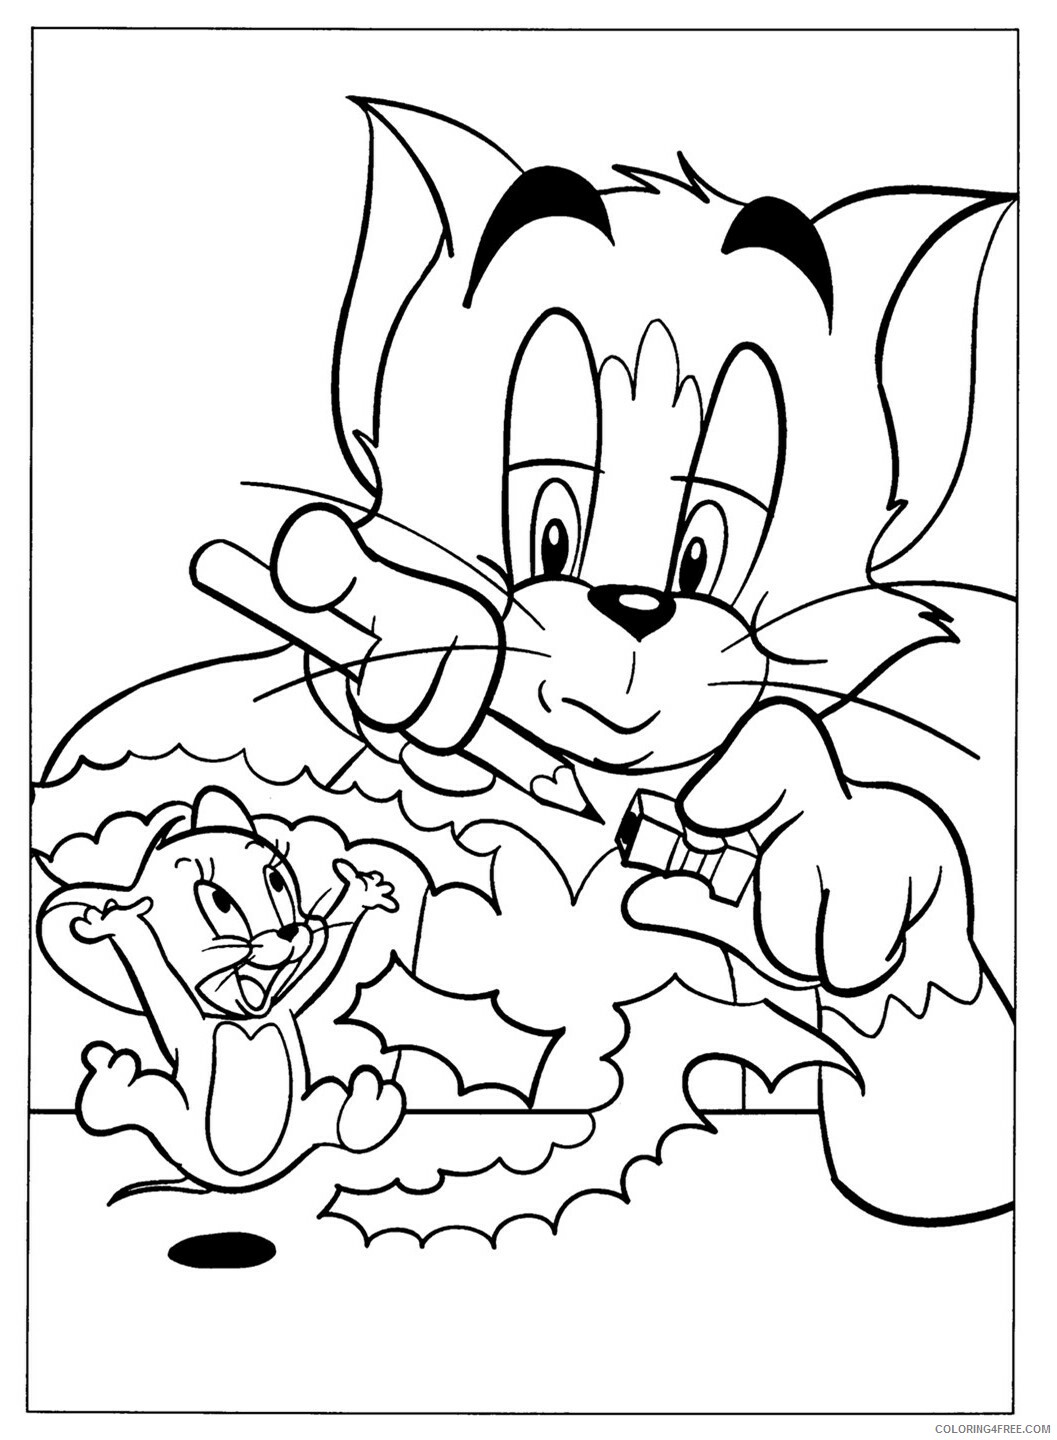 Tom and Jerry Coloring Pages TV Film Tom and Jerry Free Printable 2020 10230 Coloring4free